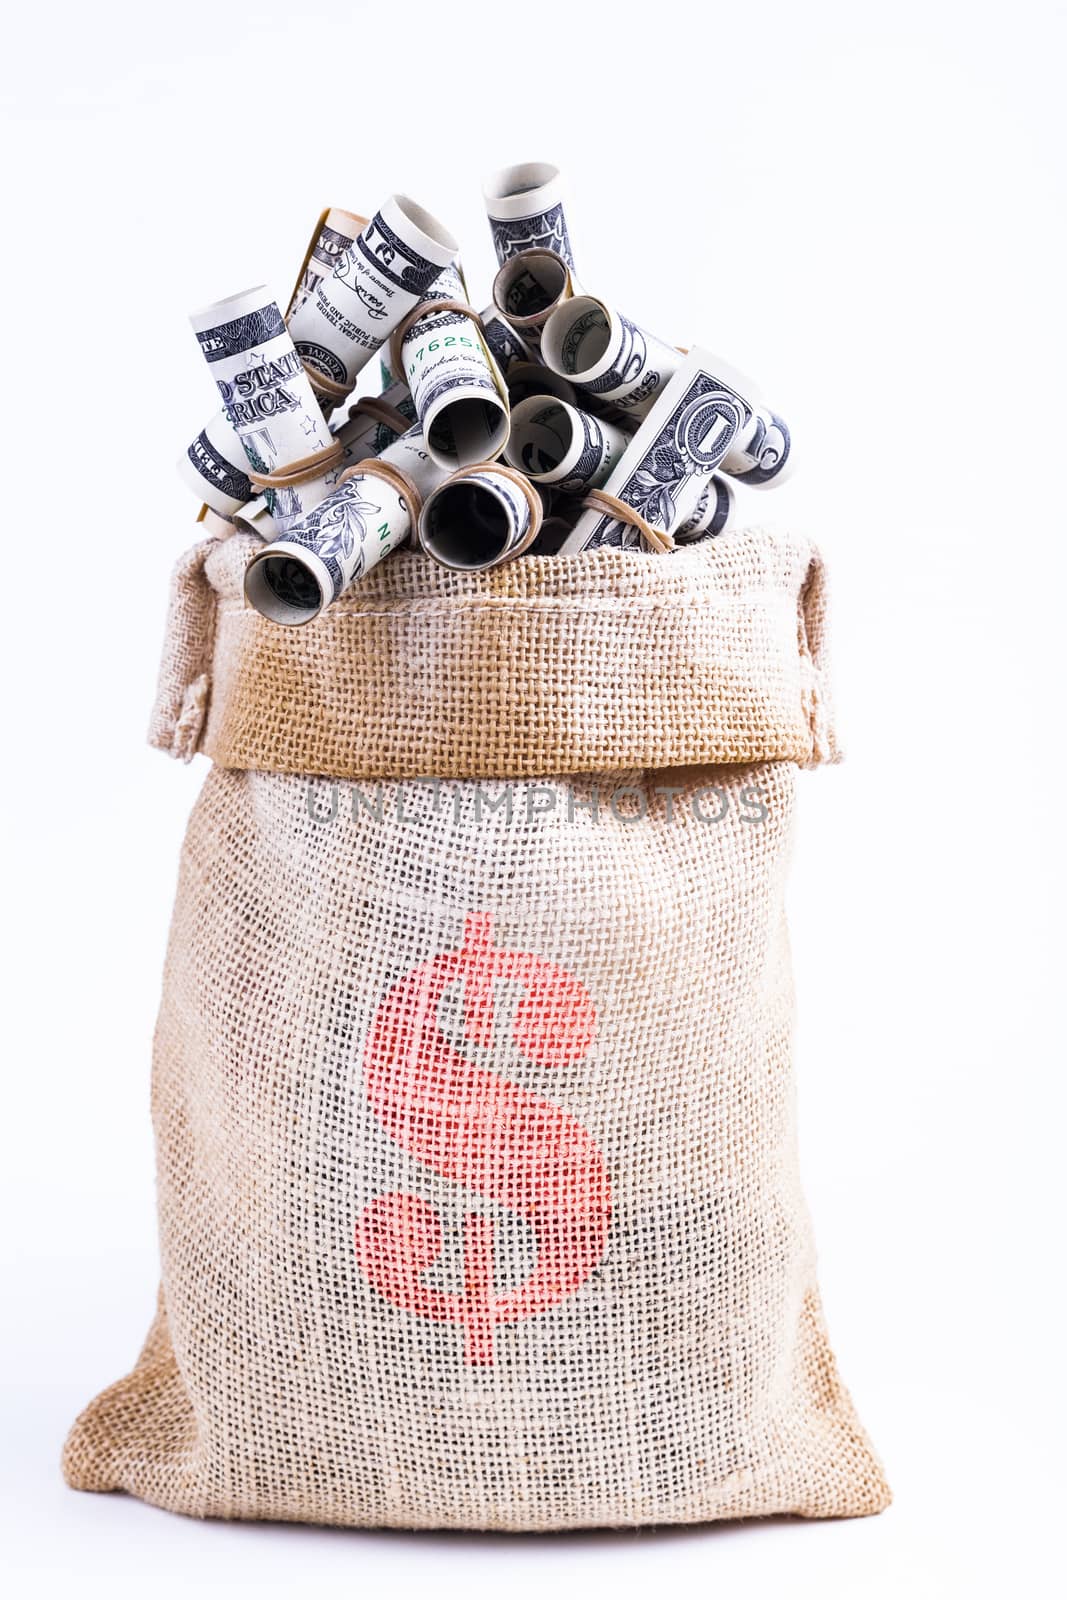 Dollars rolled up with rubber band in Sack isolated on white background